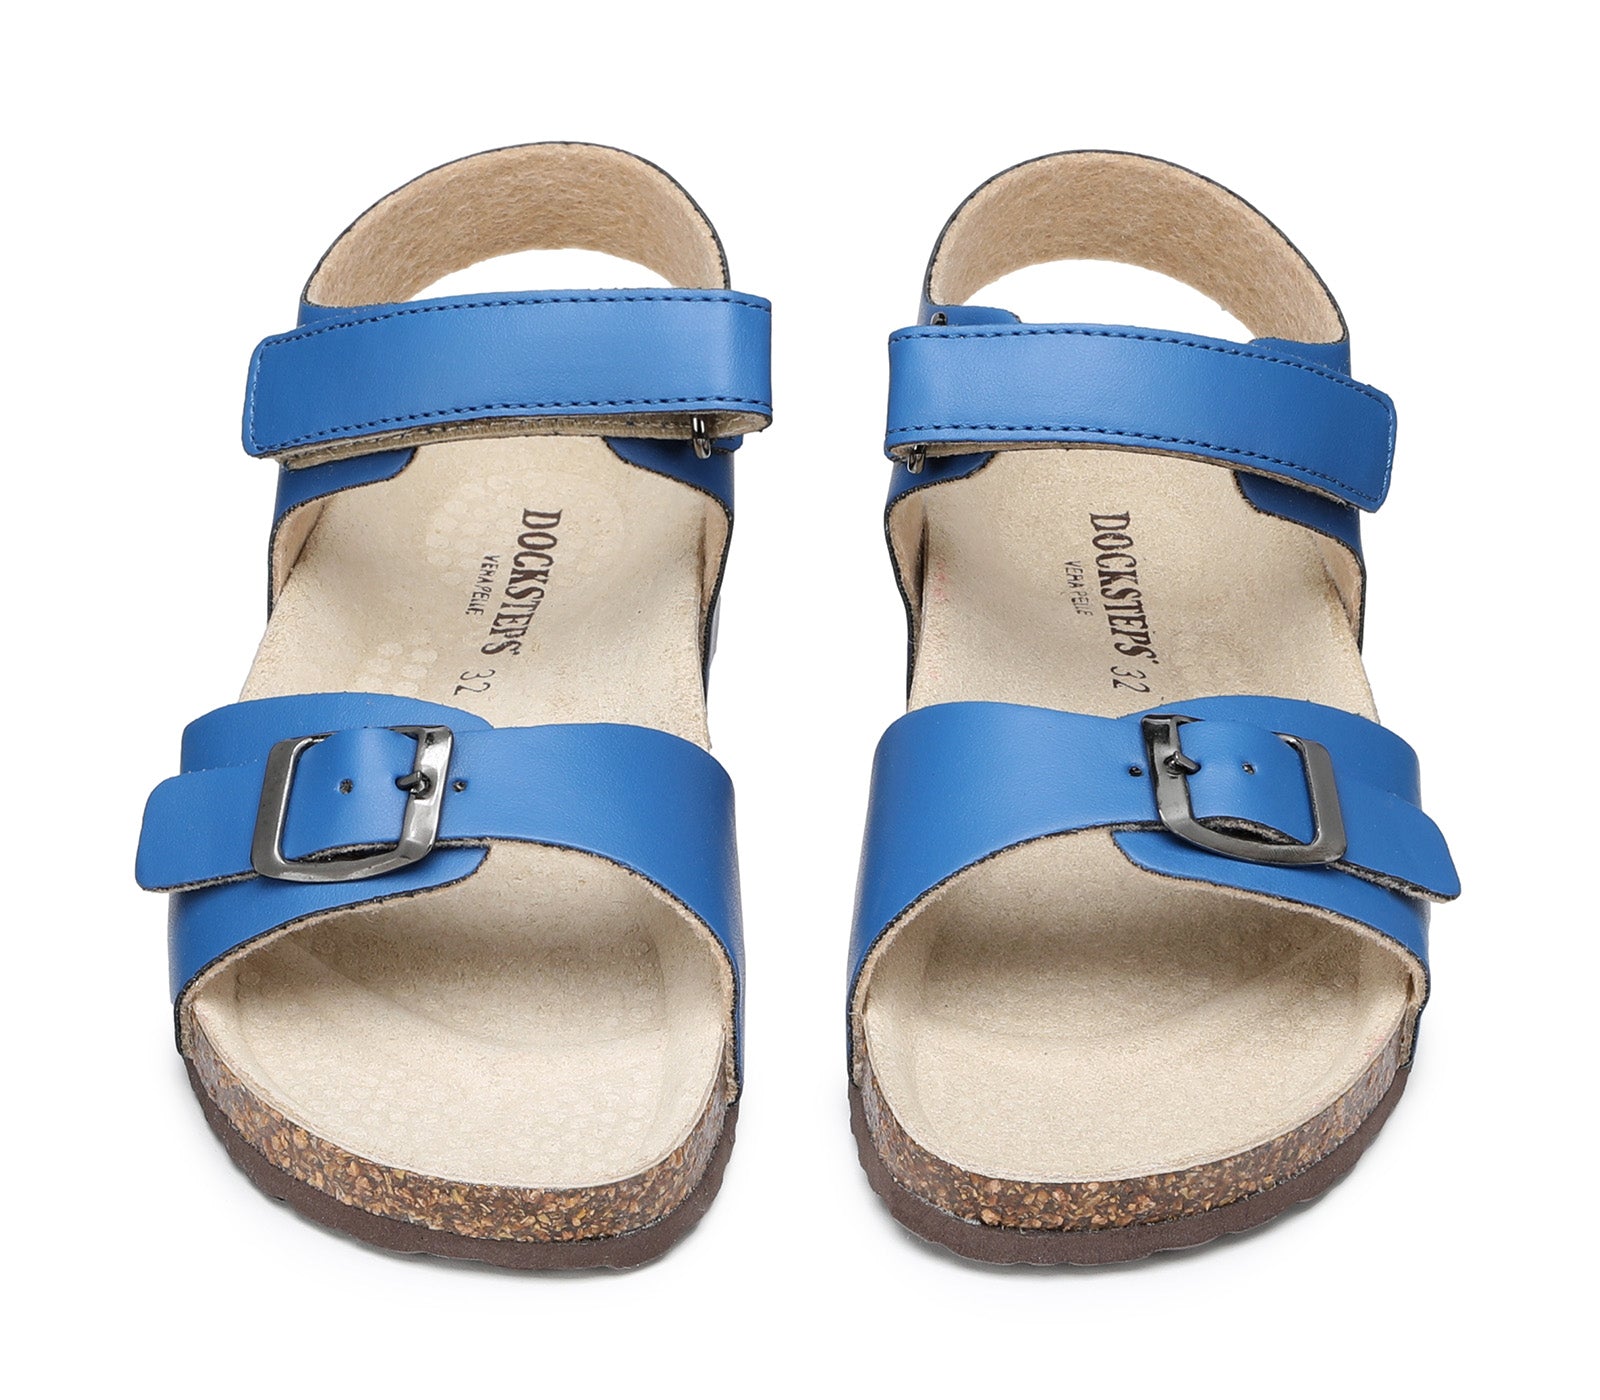 Royal Blue Children's Sandals with Velcro Closure and Contoured Insole